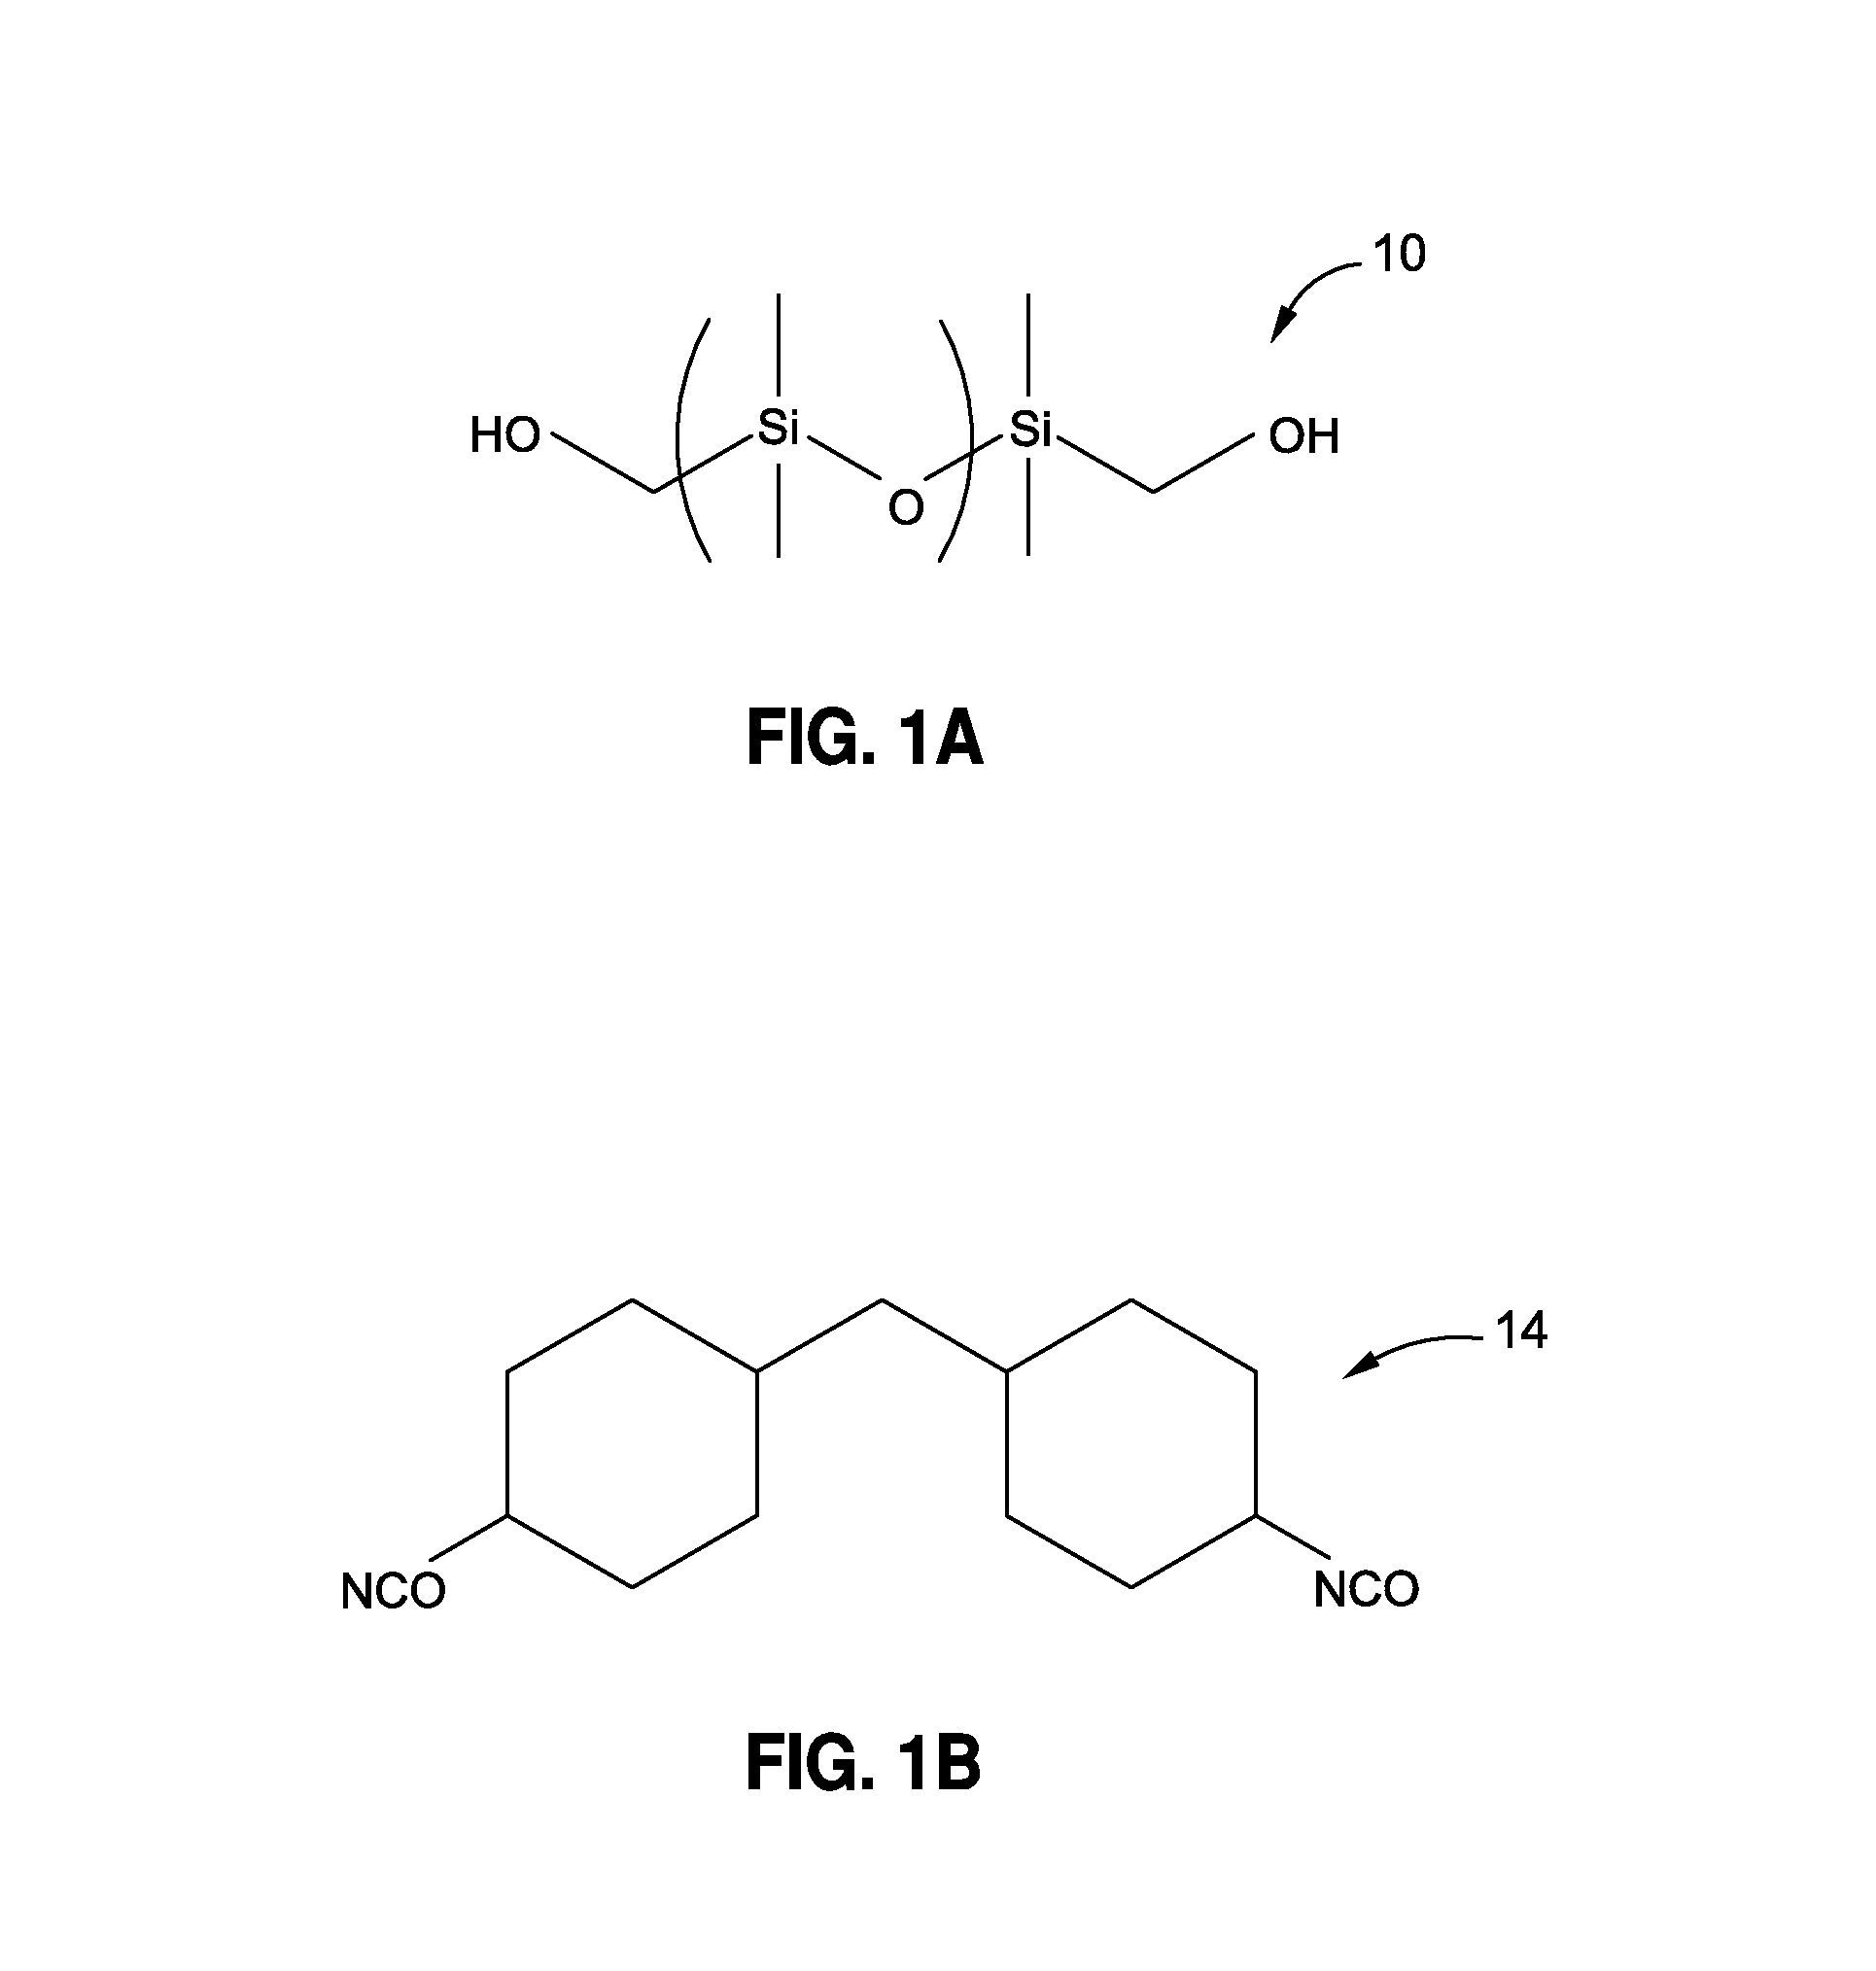 Flexible, Low Temperature, Filled Composite Material Compositions, Coatings, and Methods